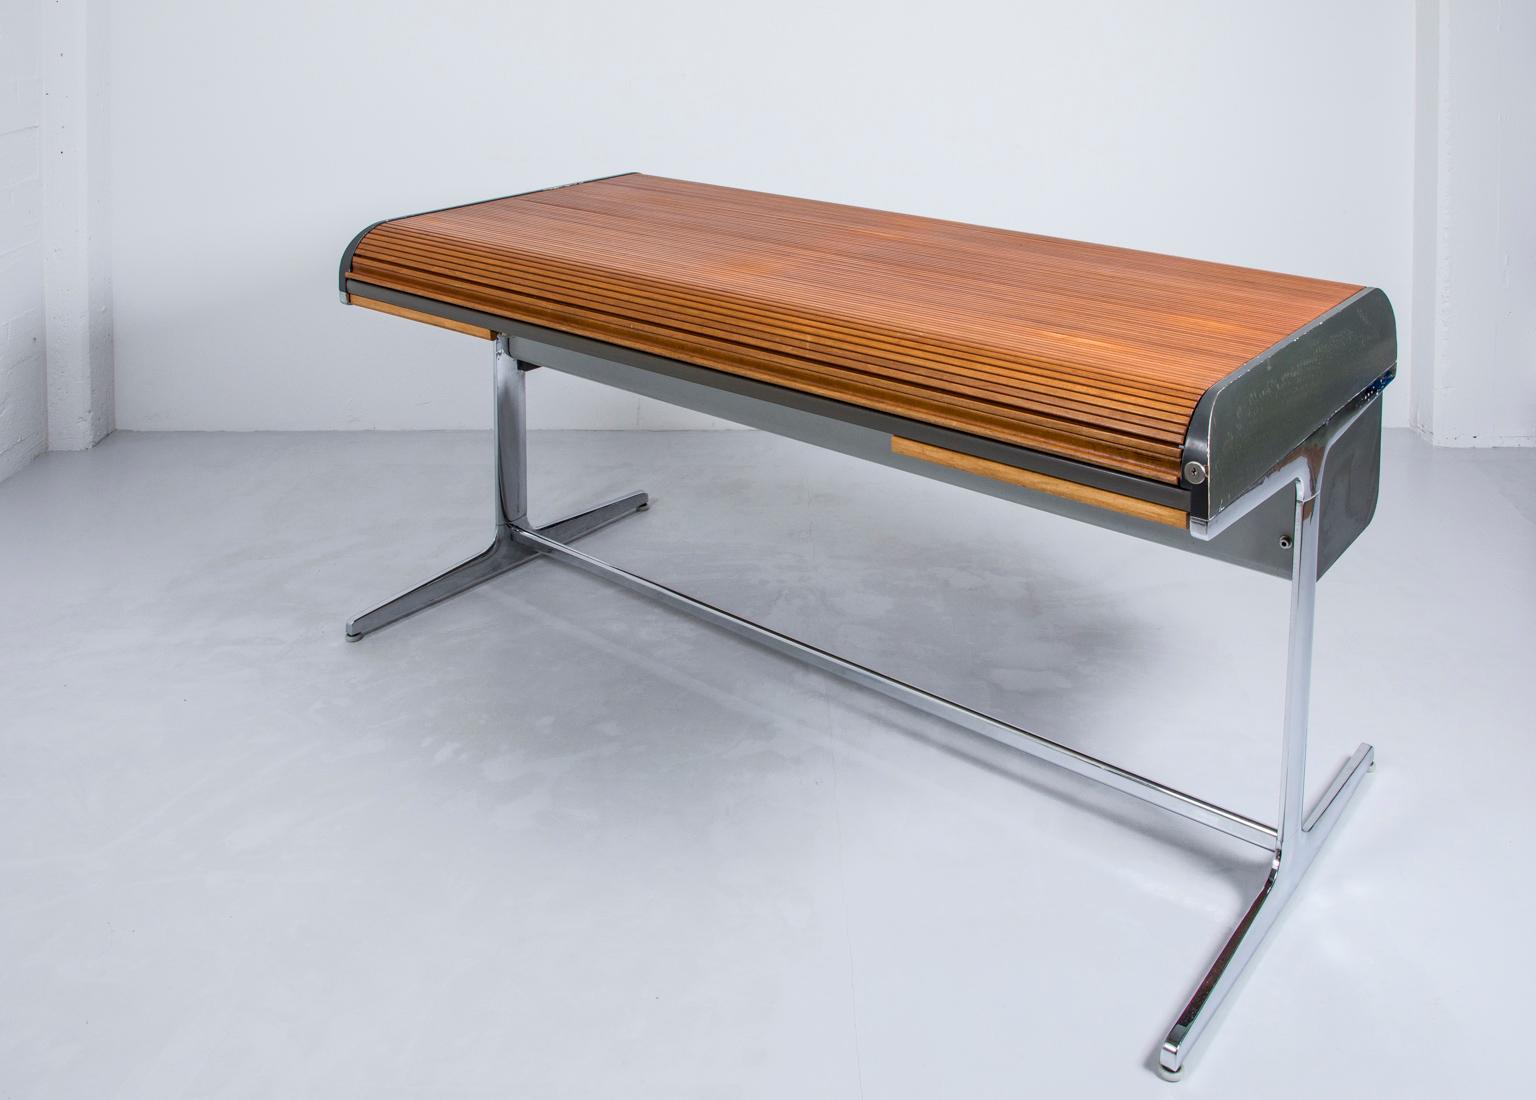 This Mid-Century Modern Classic ‘Action’ office desk was designed by George Nelson as seen in Kubrick’s sci-fi masterpiece 2001: A Space Odyssey. This piece was manufactured in 1964 by Herman Miller and features a walnut top and chromed steel base.